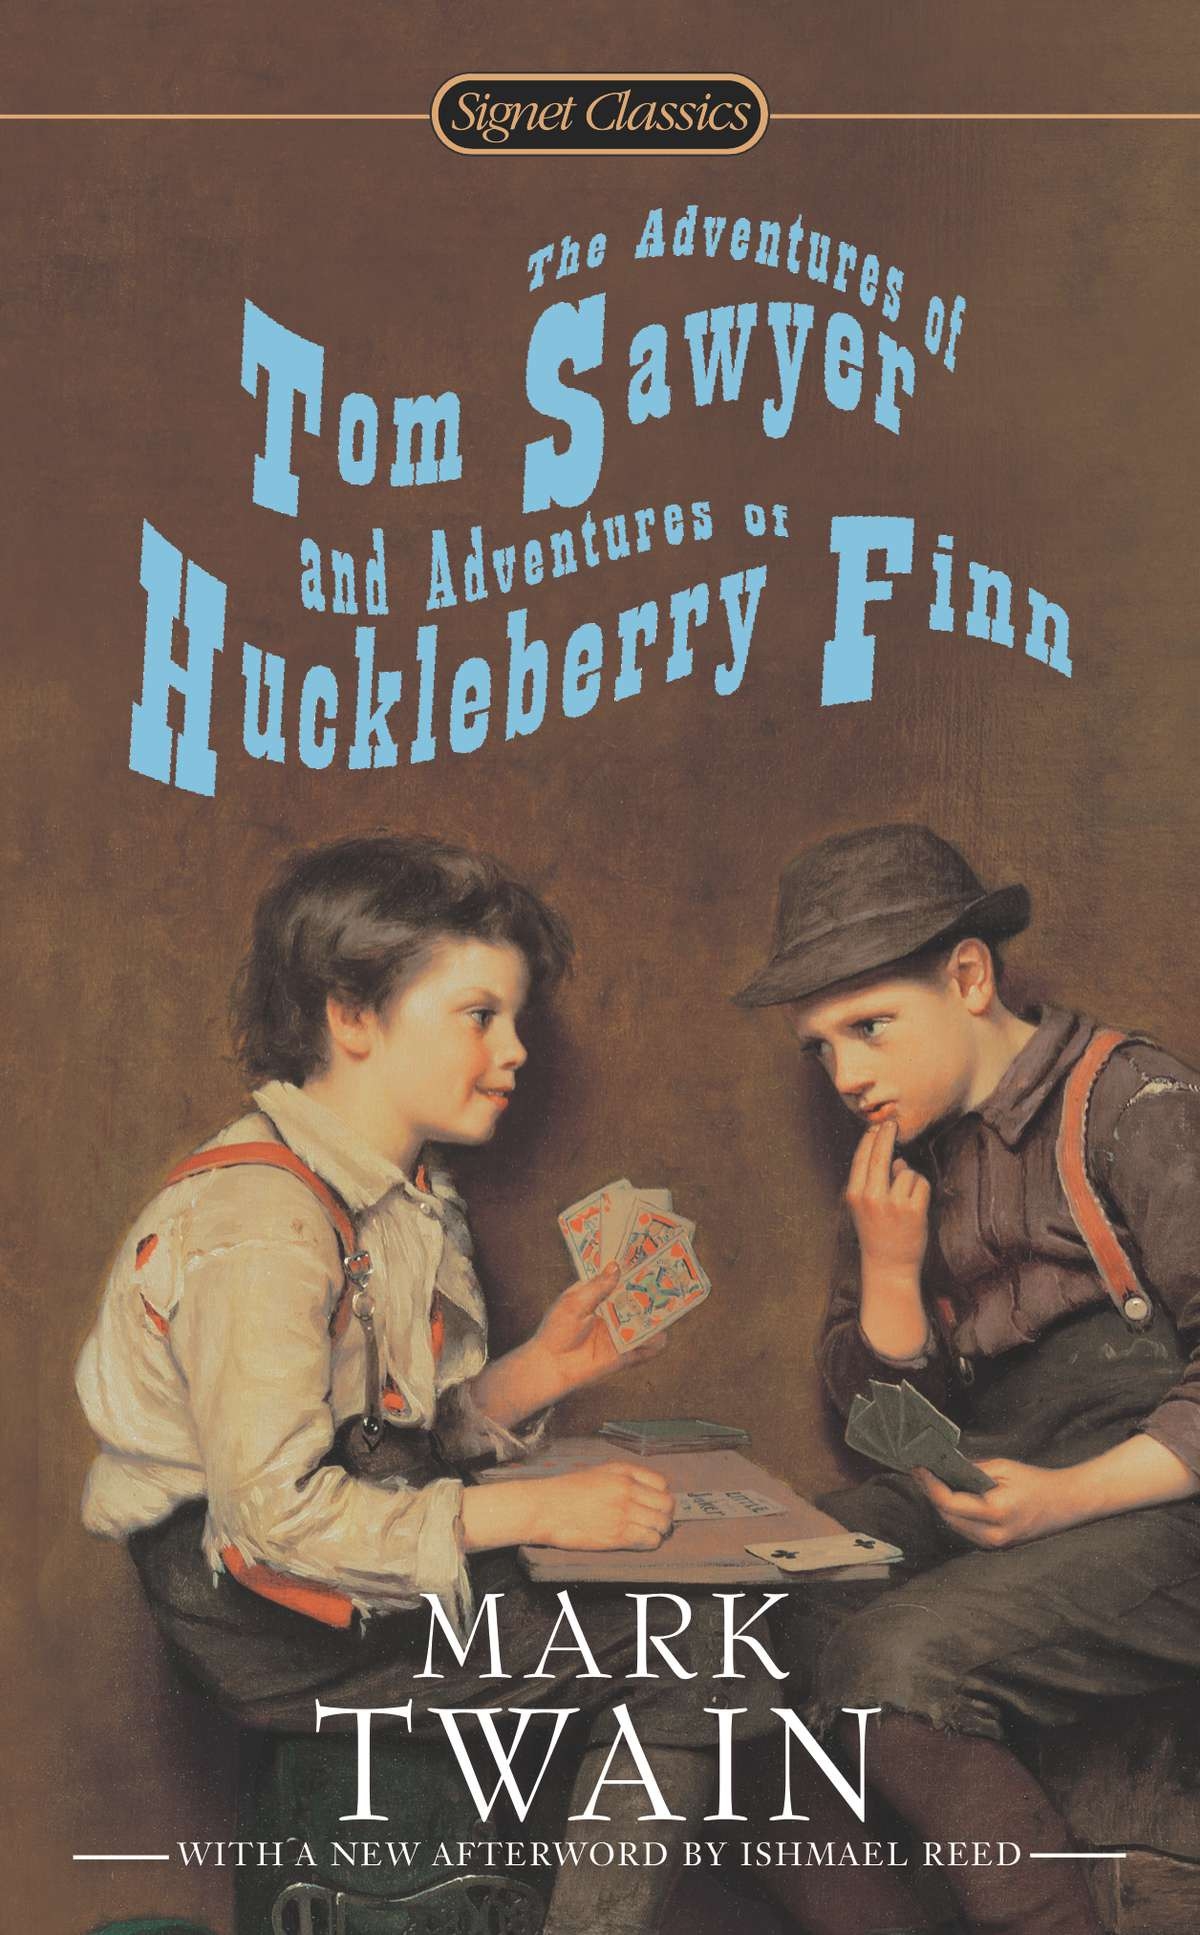 book review of the story adventures of tom sawyer